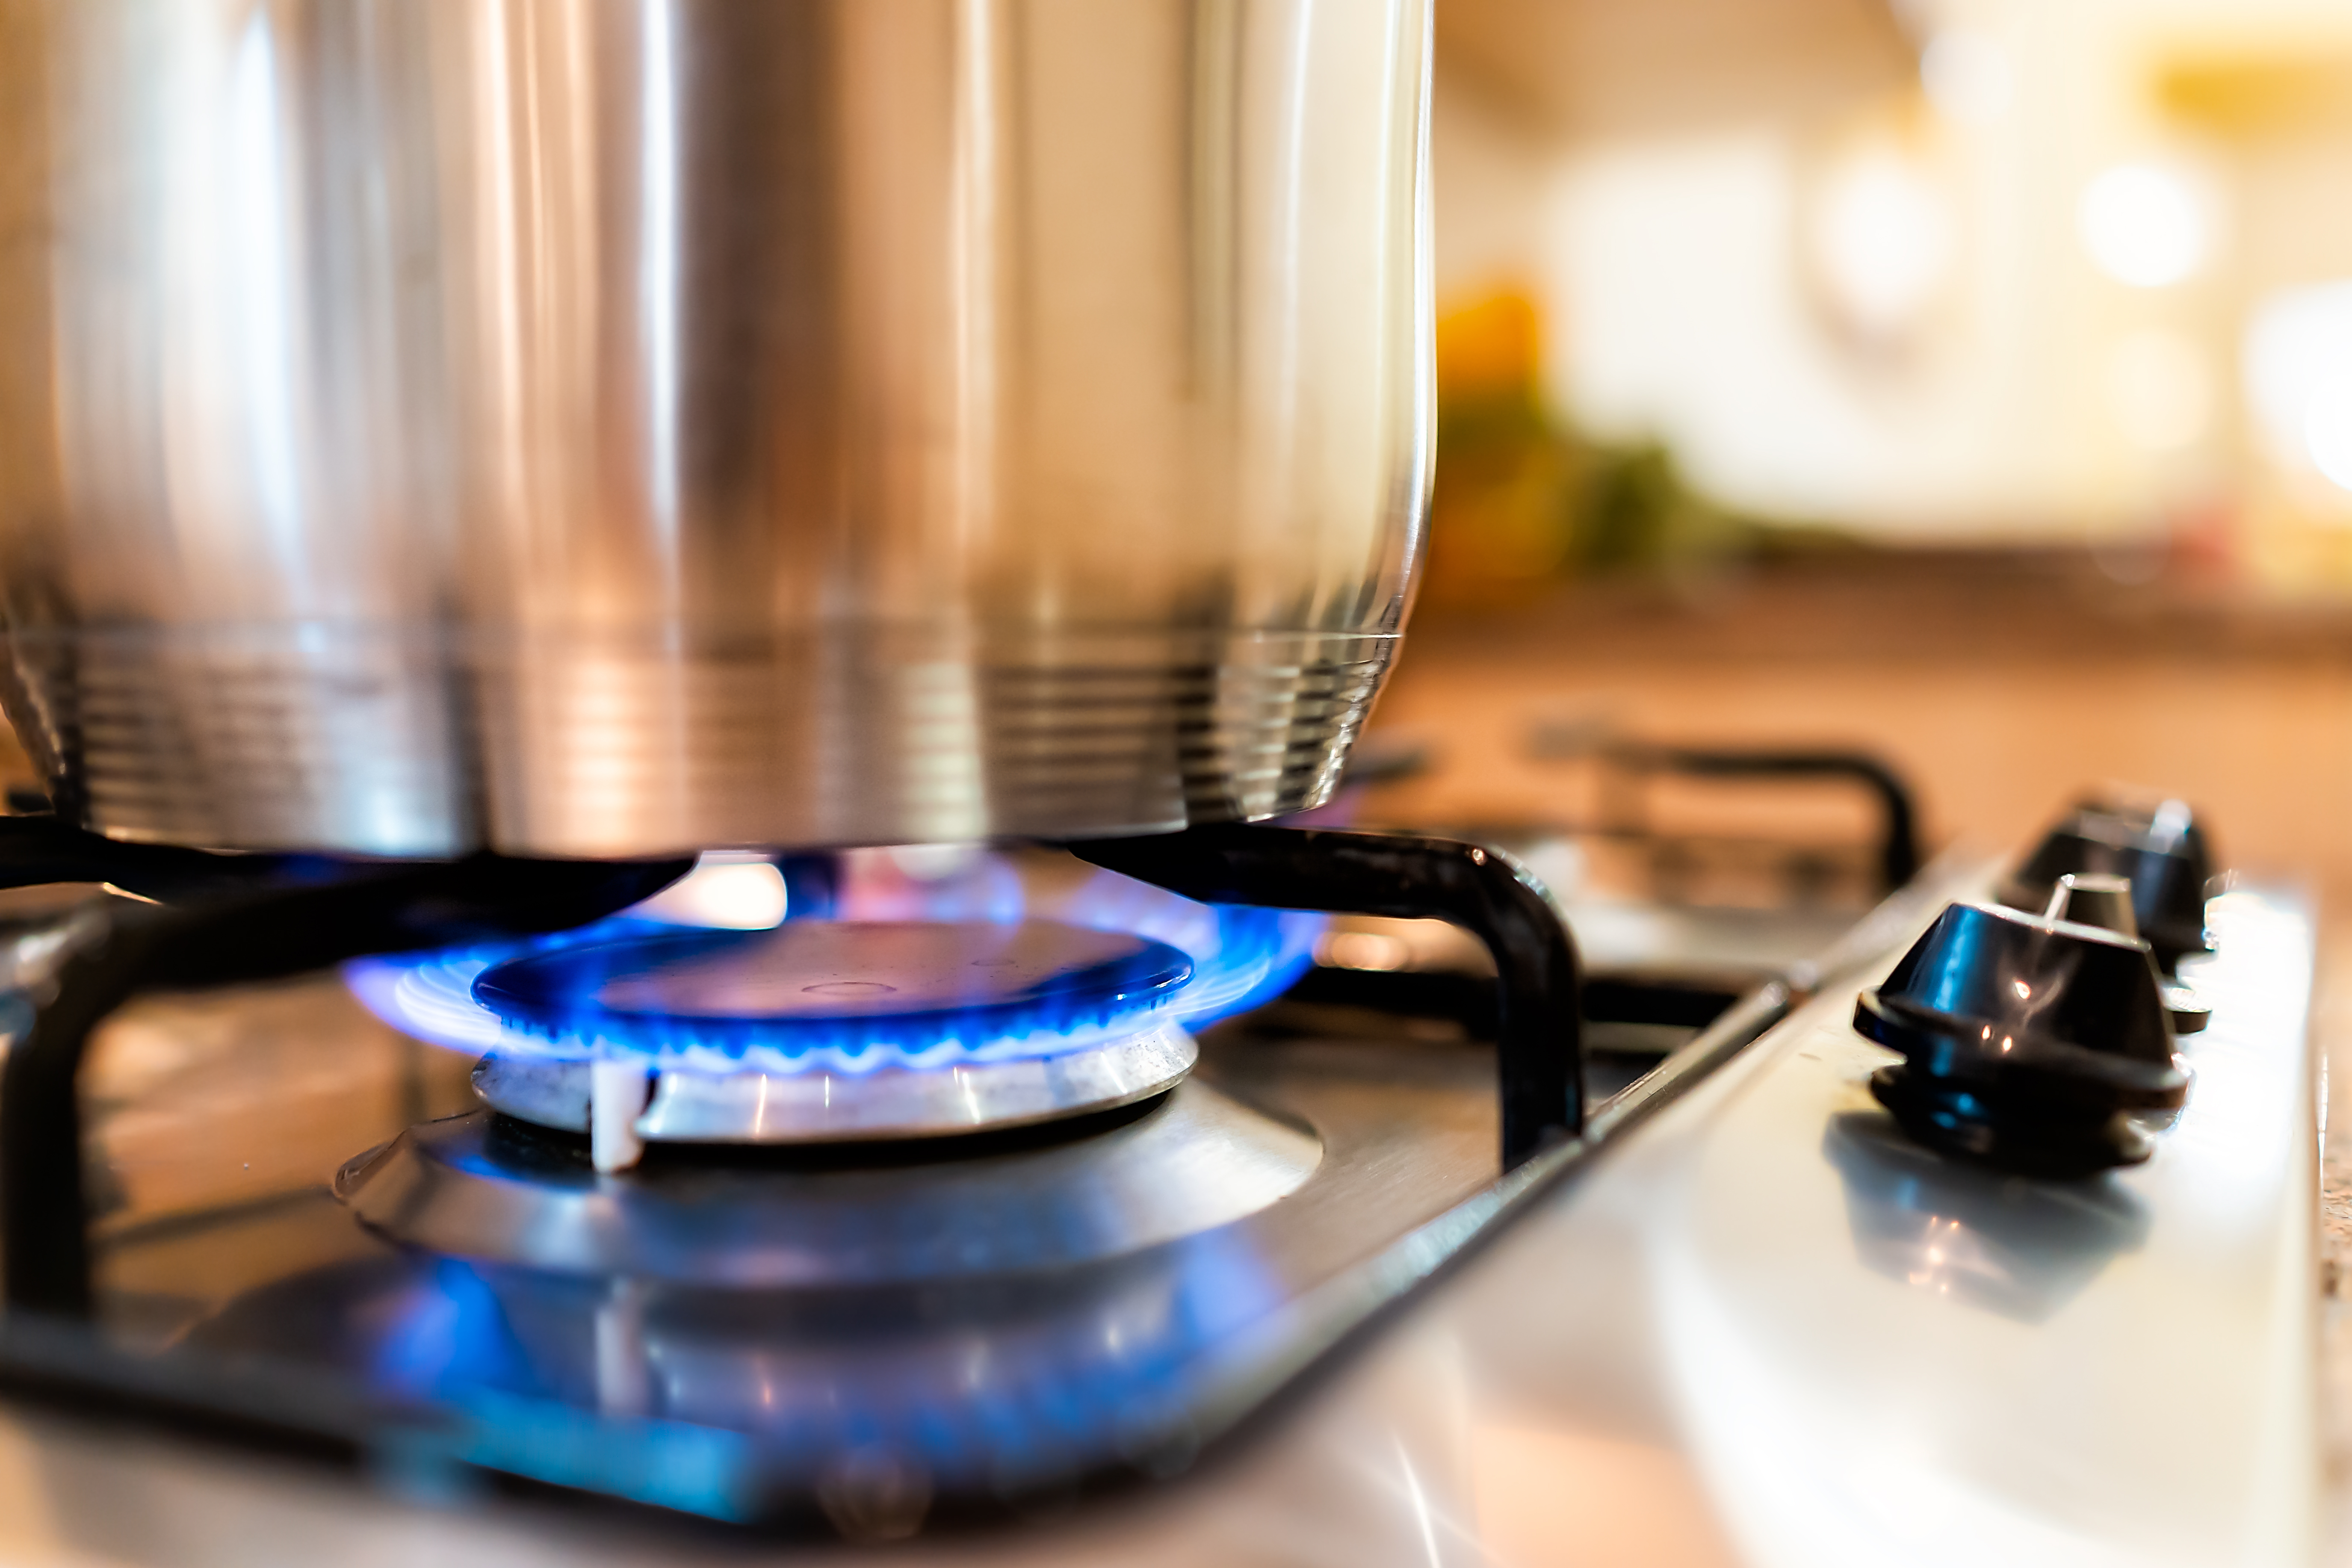 Considering indoor air quality when cooking - LP Gas